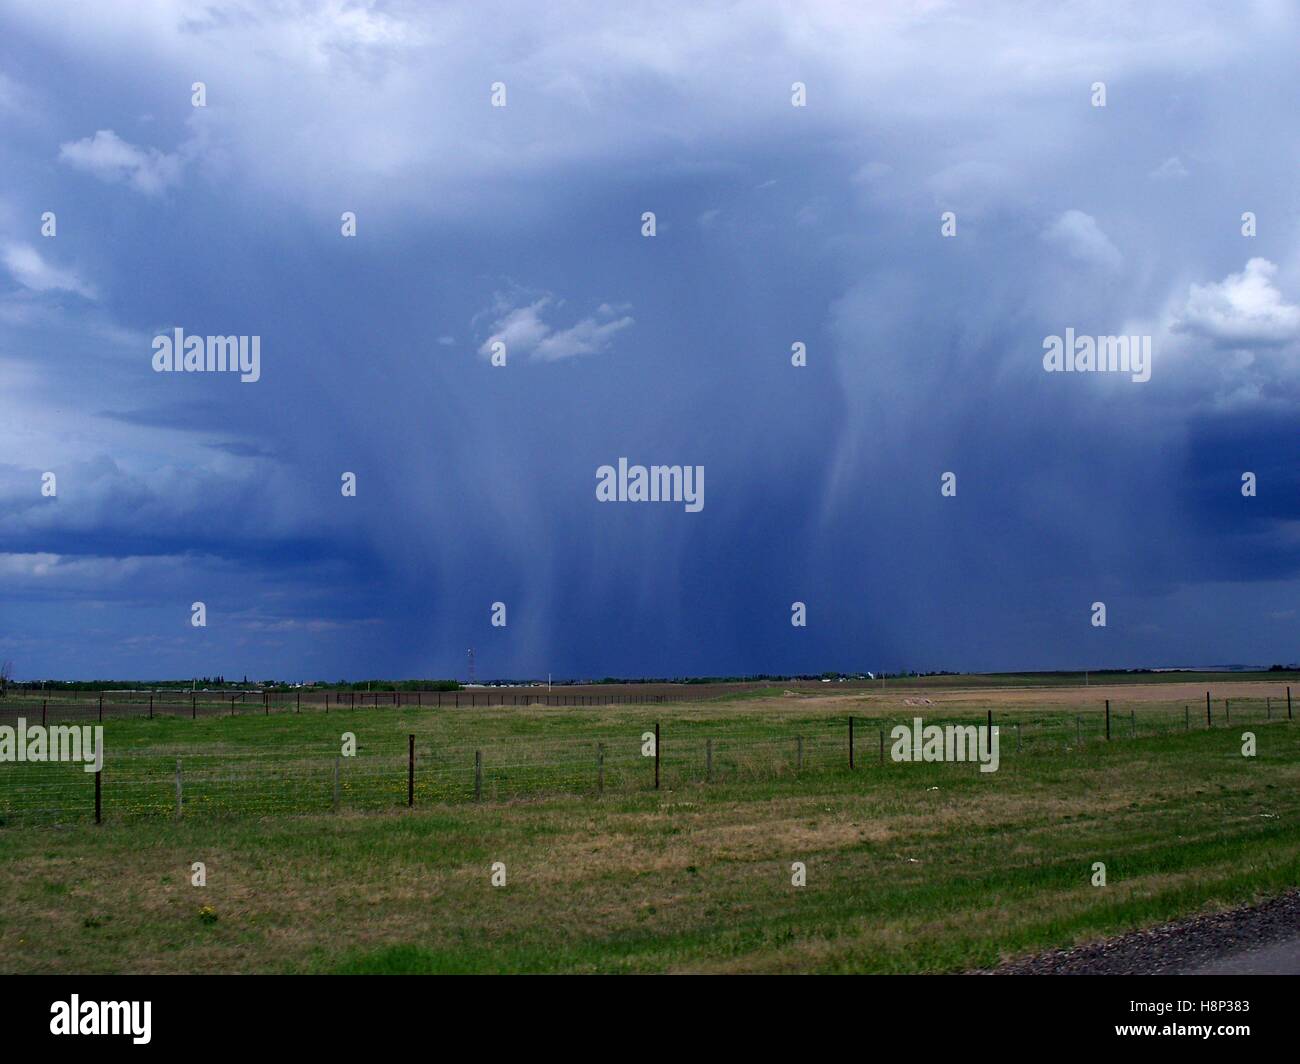 Watching A Storm From Afar in Alberta, Canada Stock Photo